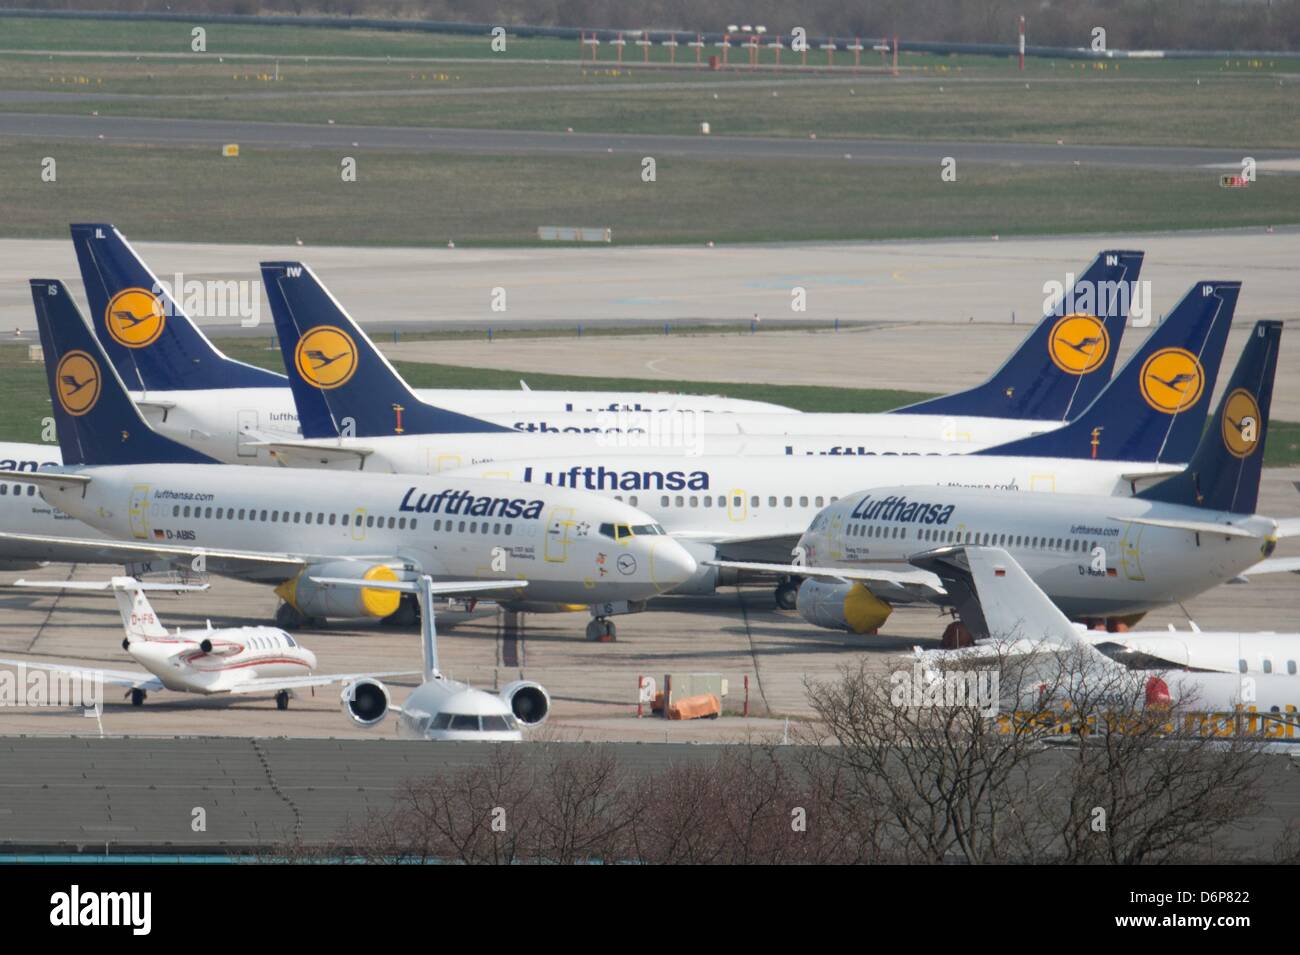 Air planes of the airline Lufthansa park on the runway of the airport in Schoenefeld, Germany, 22 April 2013. It is the second round of strikes, initiated as reaction to an ongoing collective bargaining and negotiations on labor conditions of about 33.000 technicians and flight attendants. Photo: Marc Tirl Stock Photo